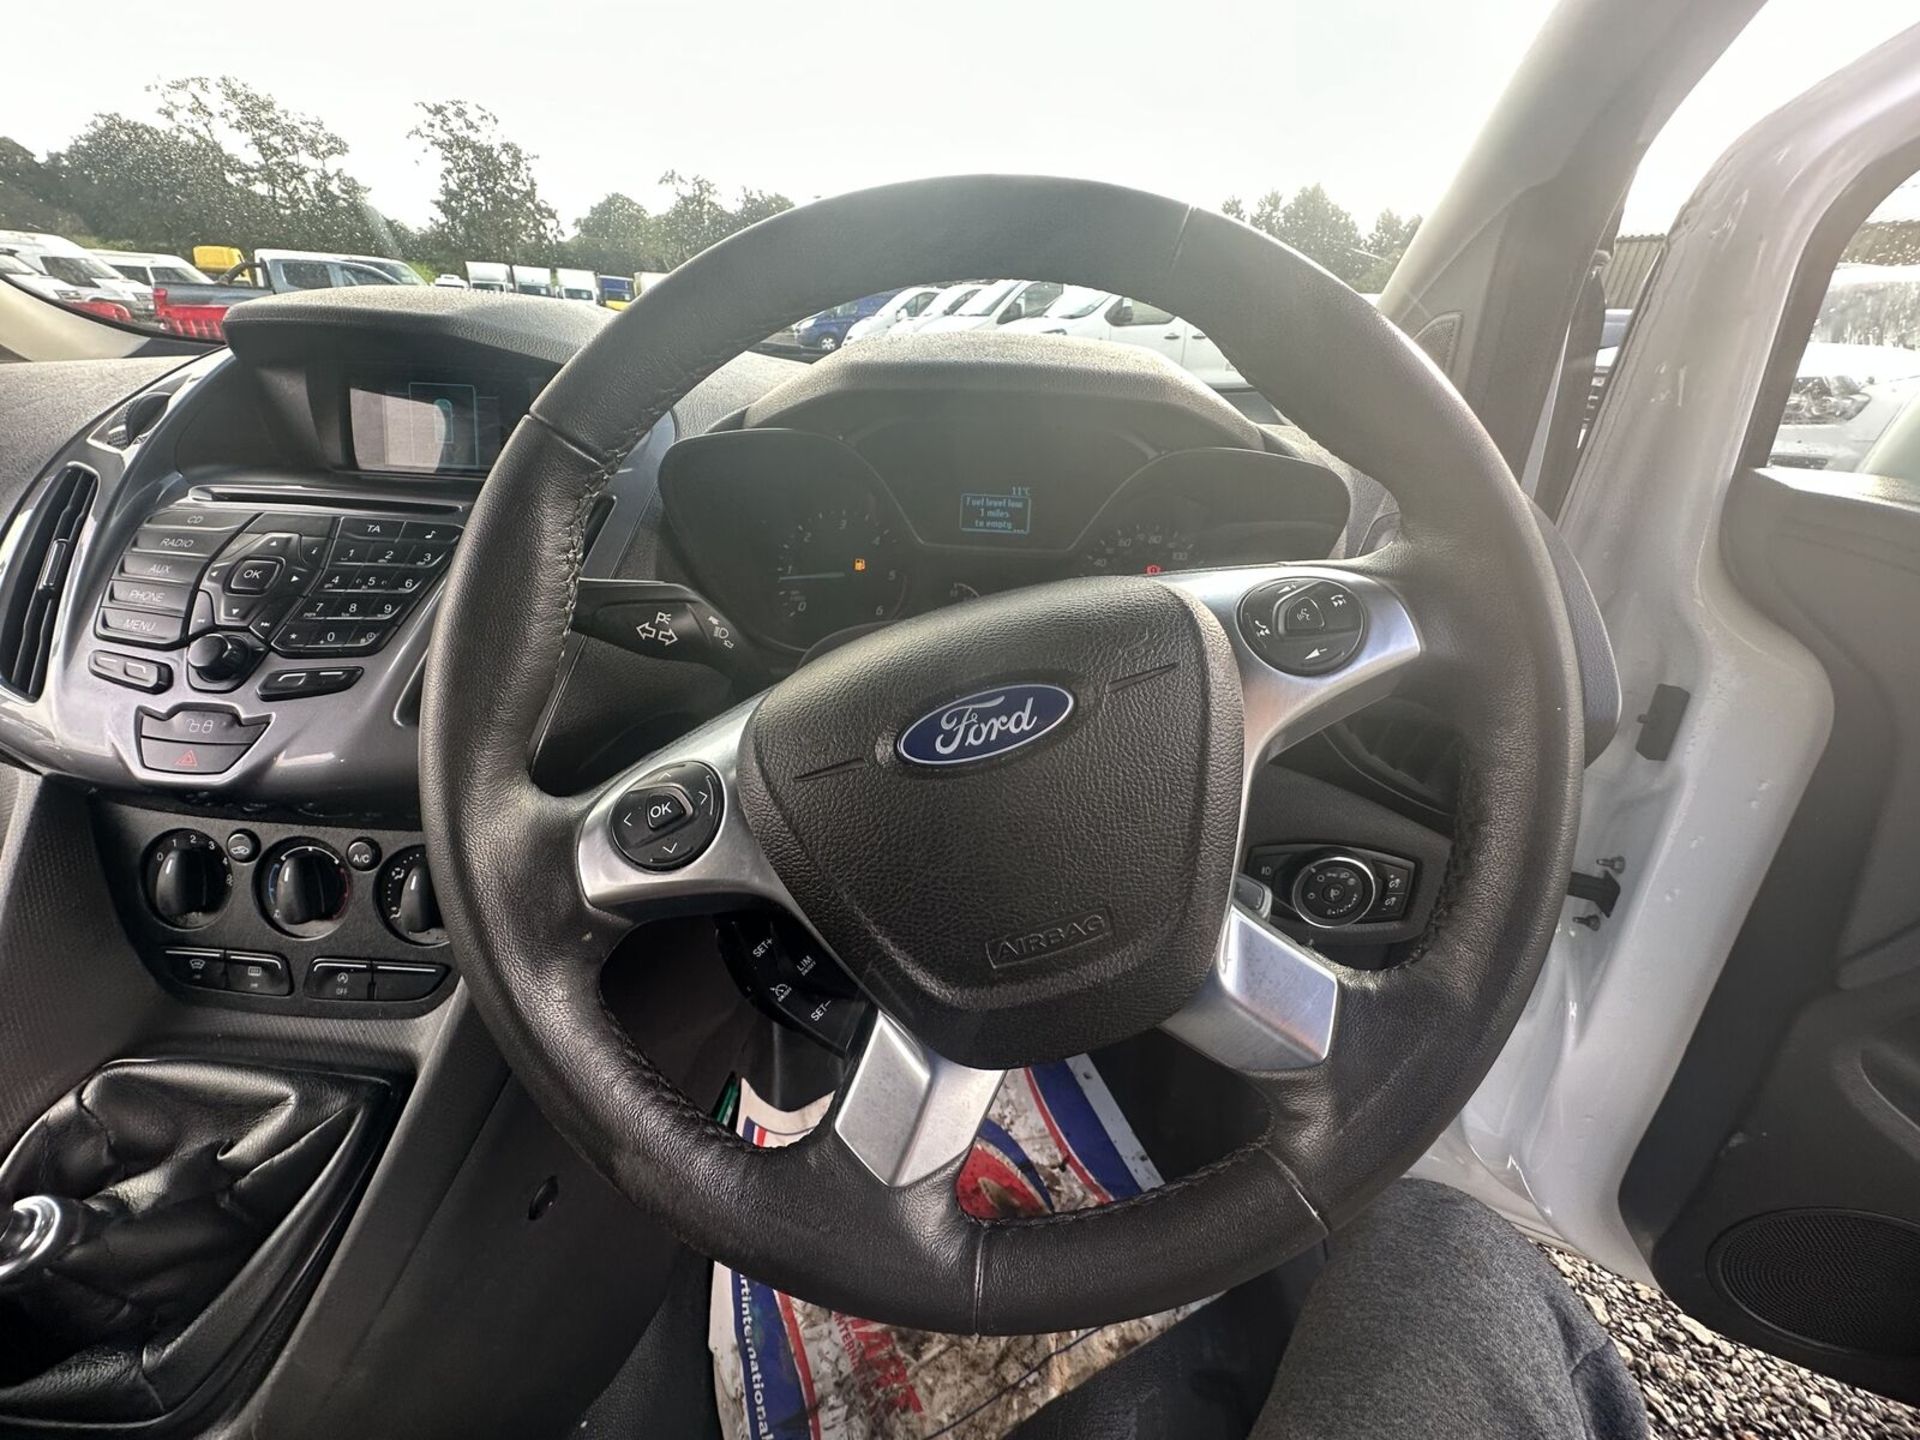 FULL SERVICE HISTORY: 2018 FORD TRANSIT CONNECT VAN - MOT AUG 2024 - NO VAT ON THE HAMMER - Image 6 of 14